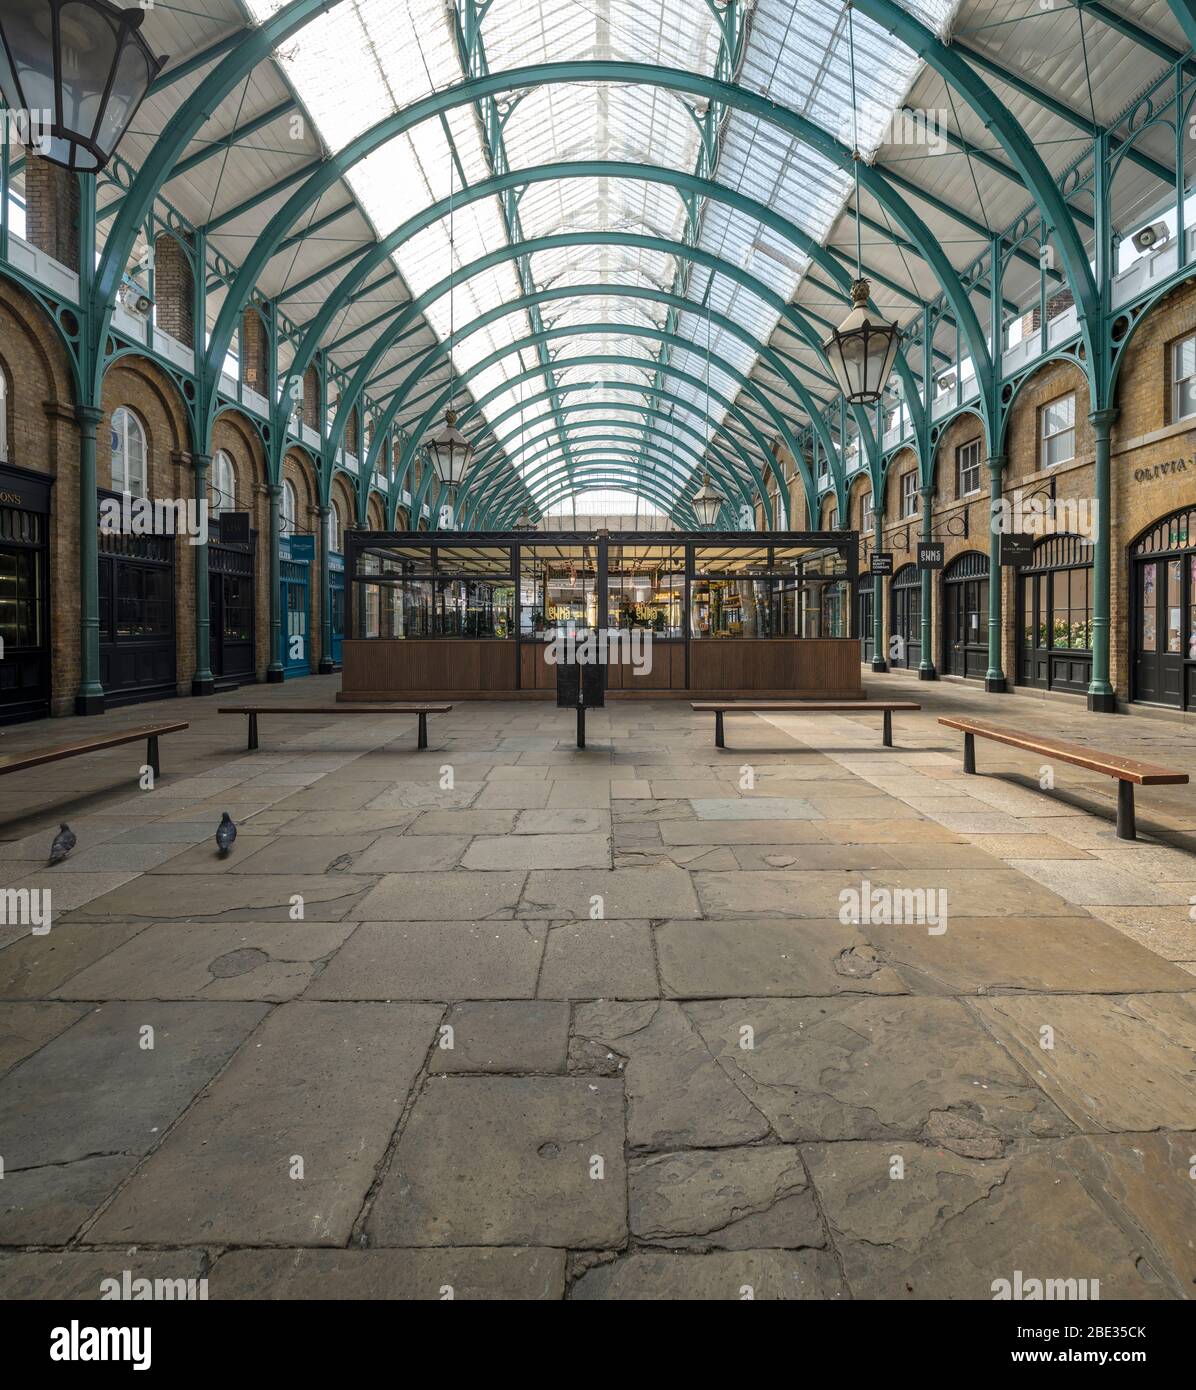 Covent Garden undercover Market deserted, empty and quiet during enforced lockdown throughout London & UK due to coronavirus covid 19 flu pandemic. Stock Photo